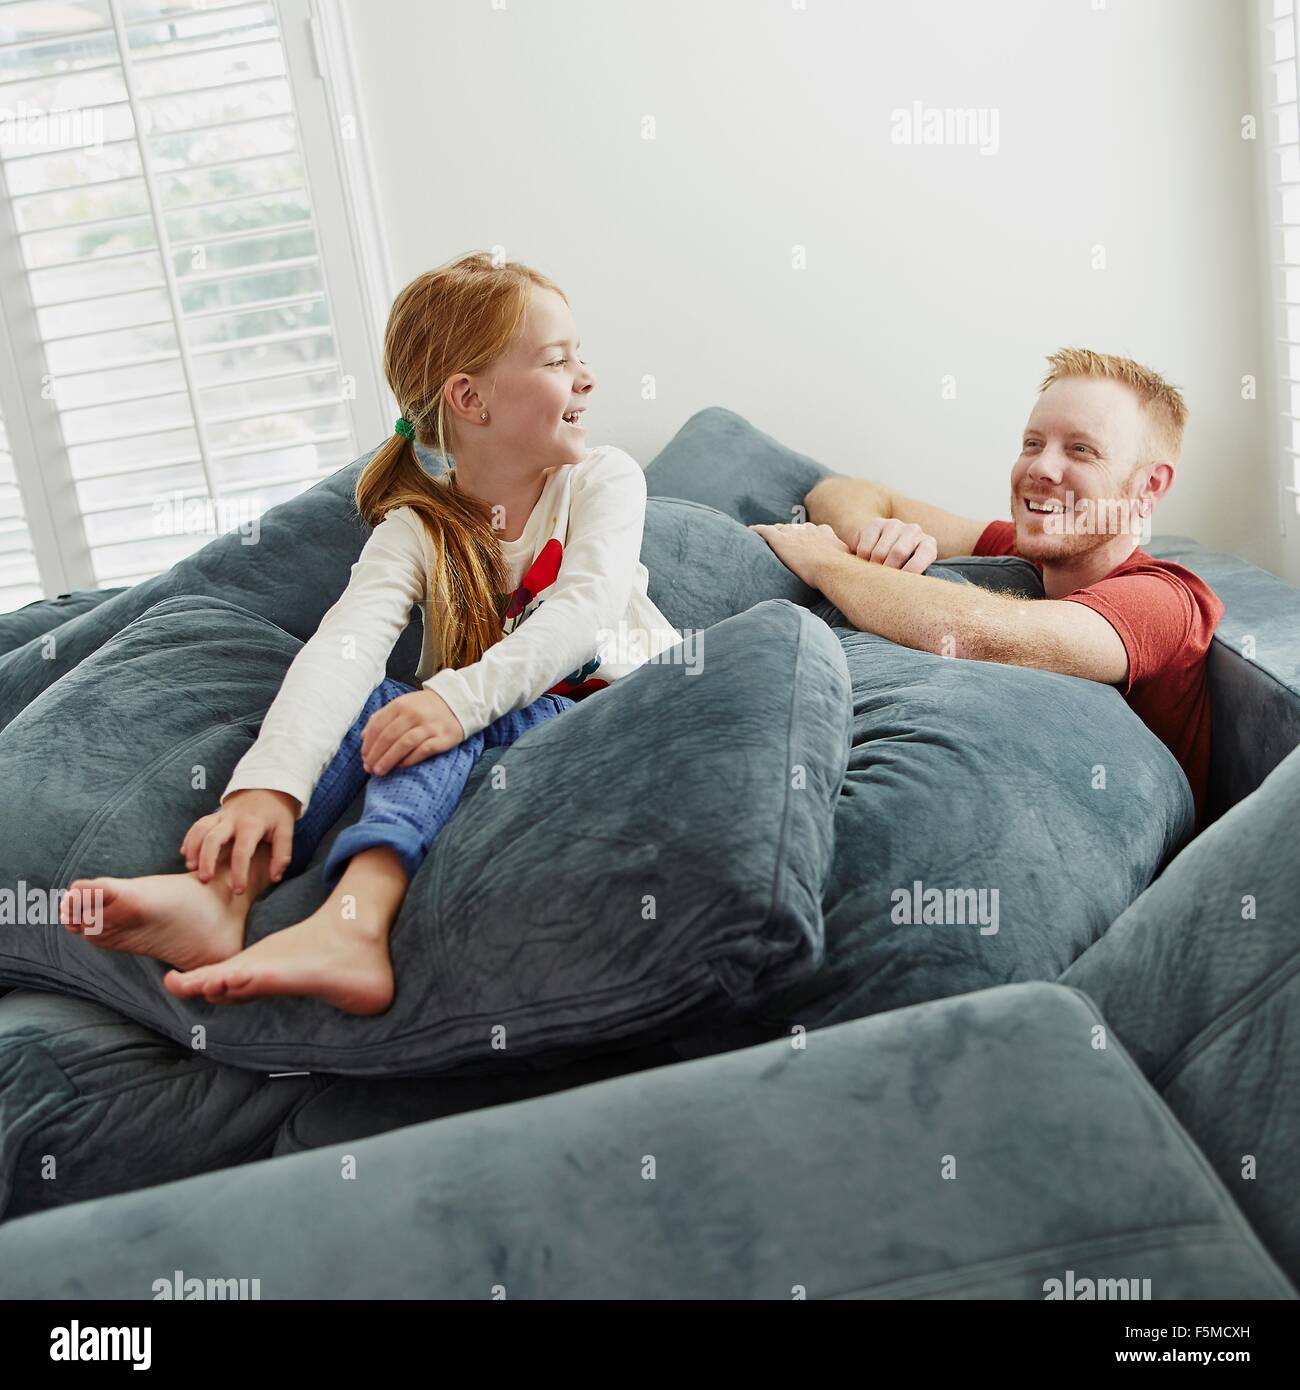 Father and daughter playing on pile of cushions in living room Stock Photo